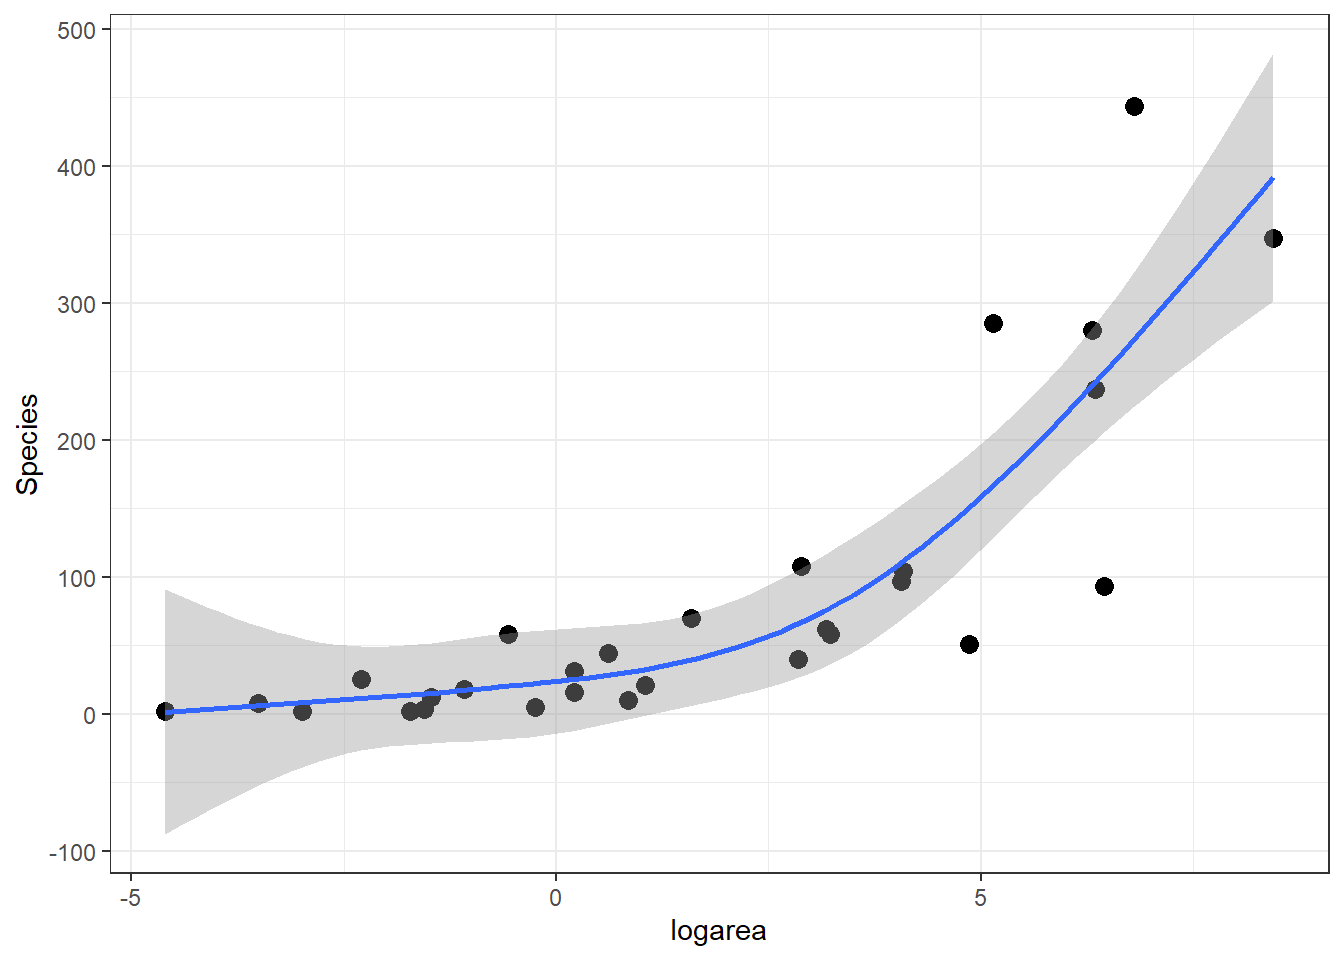 Predicted values from the natural cubic regression spline model relating plant species richness to log(Area) for 29 islands in the Galapagos Islands archipelago. Data are from M. P. Johnson & Raven (1973).